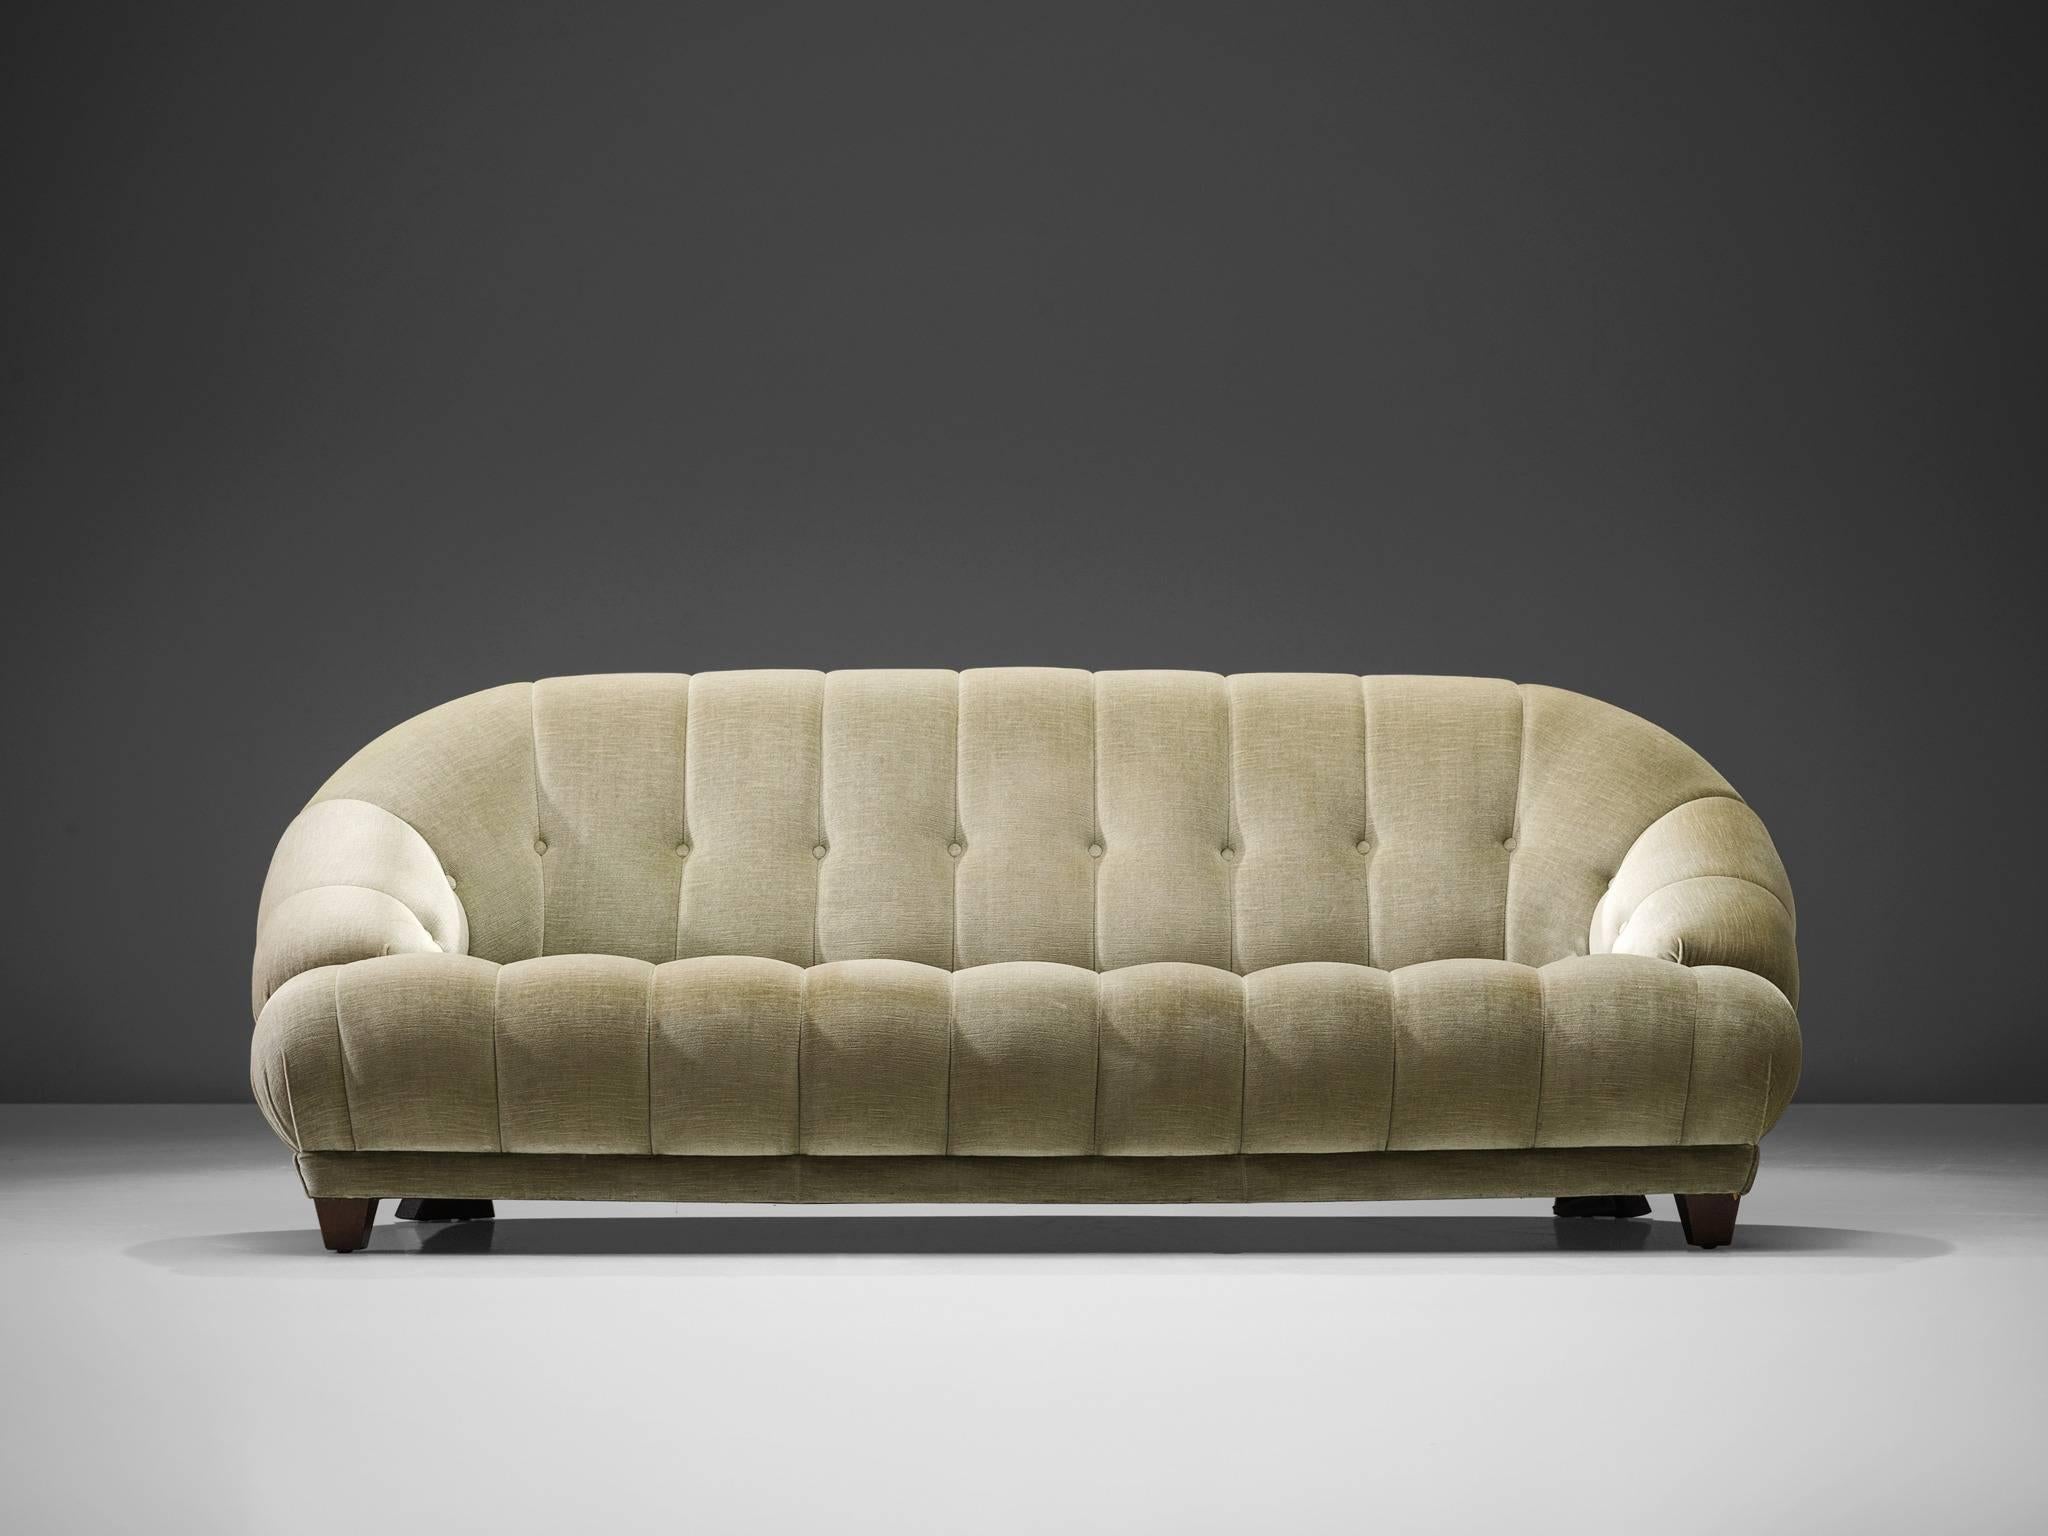 Sofa, green velvet, France, 1940s.

This voluptuous sofa in is executed in a green velvet fabric. The sofa has a curved back and very thick and wide armrests. The sofa is tufted and holds a balance between modern simplicity combined with